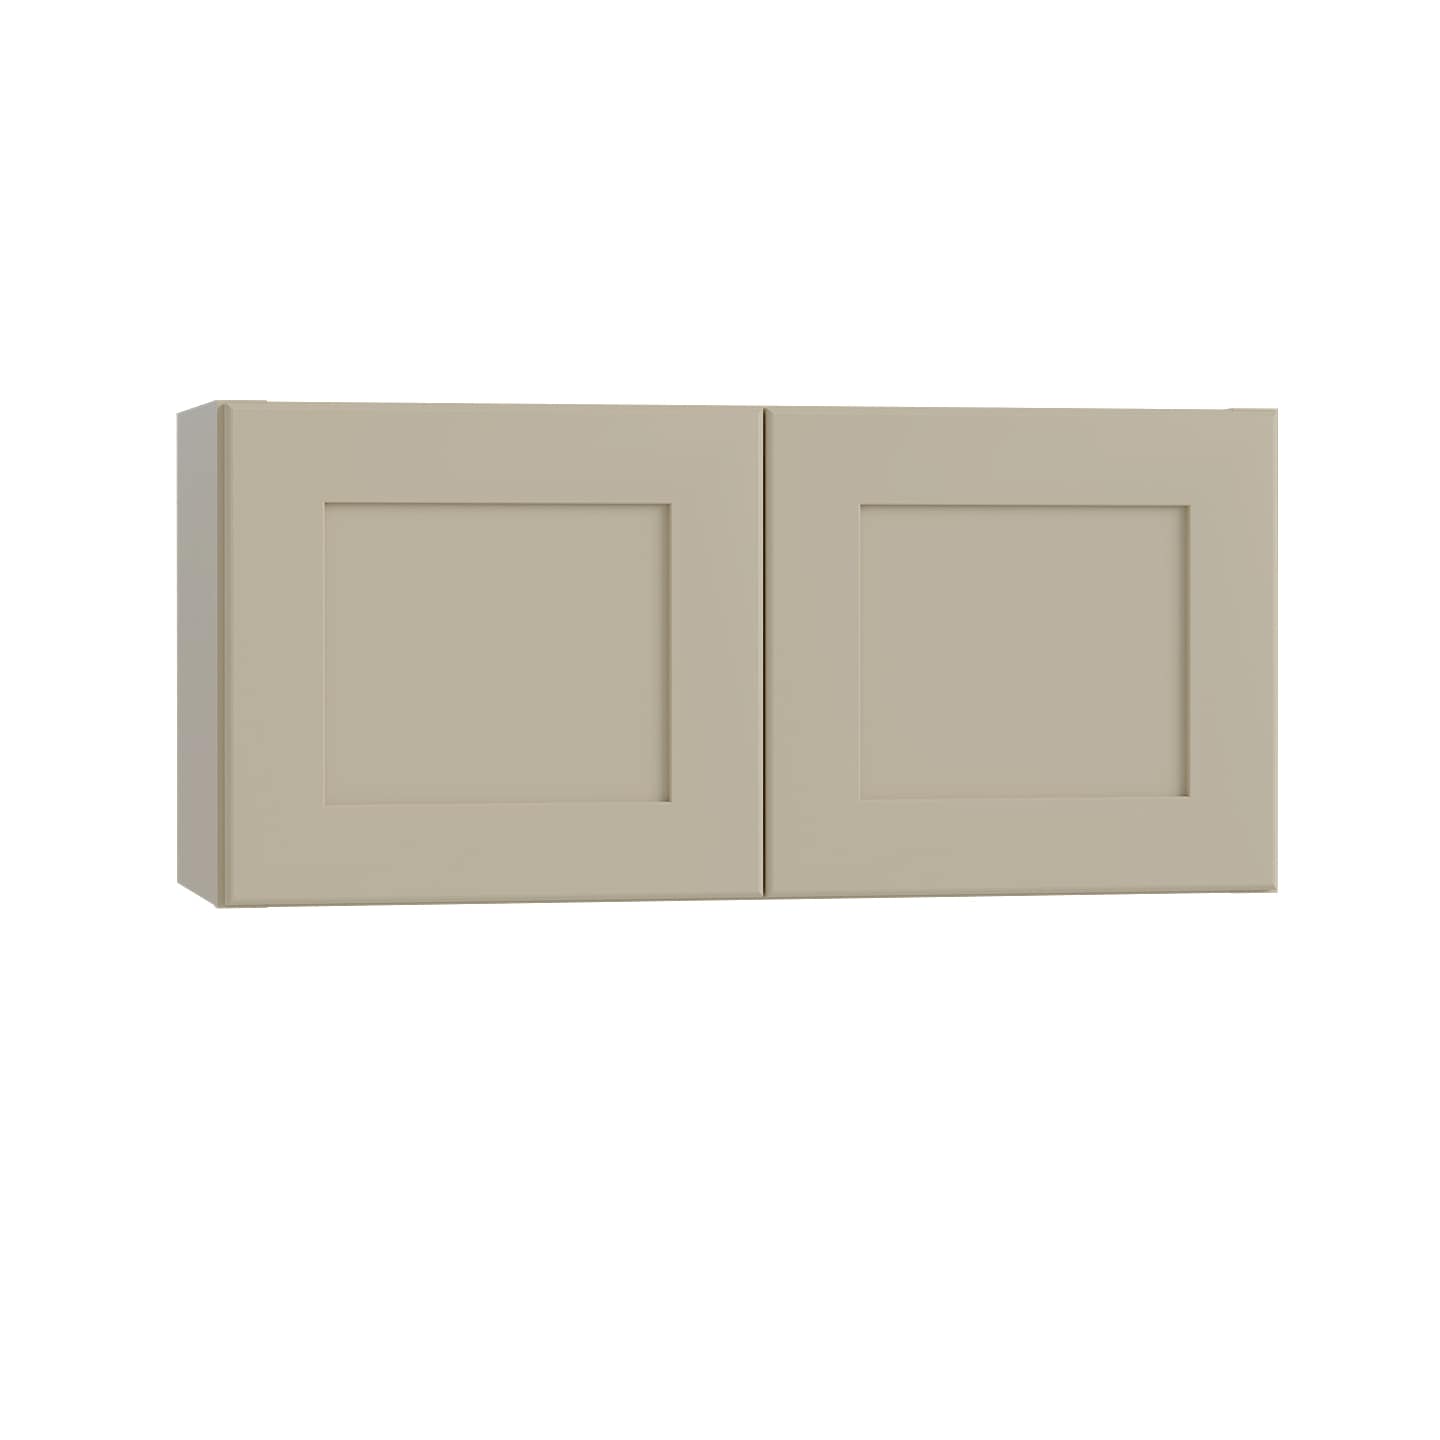 Luxxe Cabinetry 36-in W x 15-in H x 12-in D Norfolk Blended Cream Painted Door Wall Fully Assembled Semi-custom Cabinet in Off-White | W3615-NBC